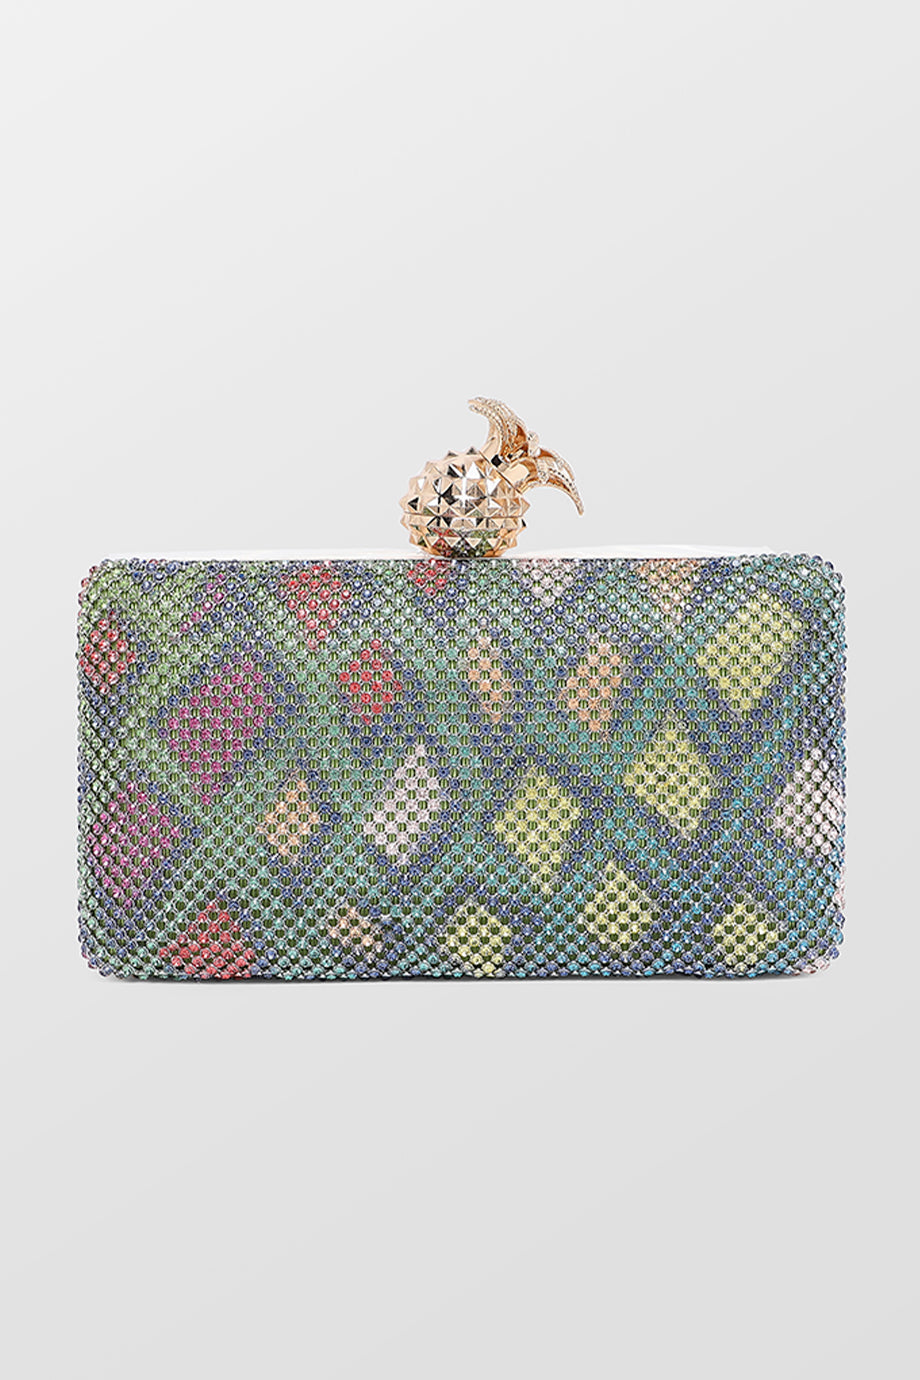 Pineapple Crystal Clutch